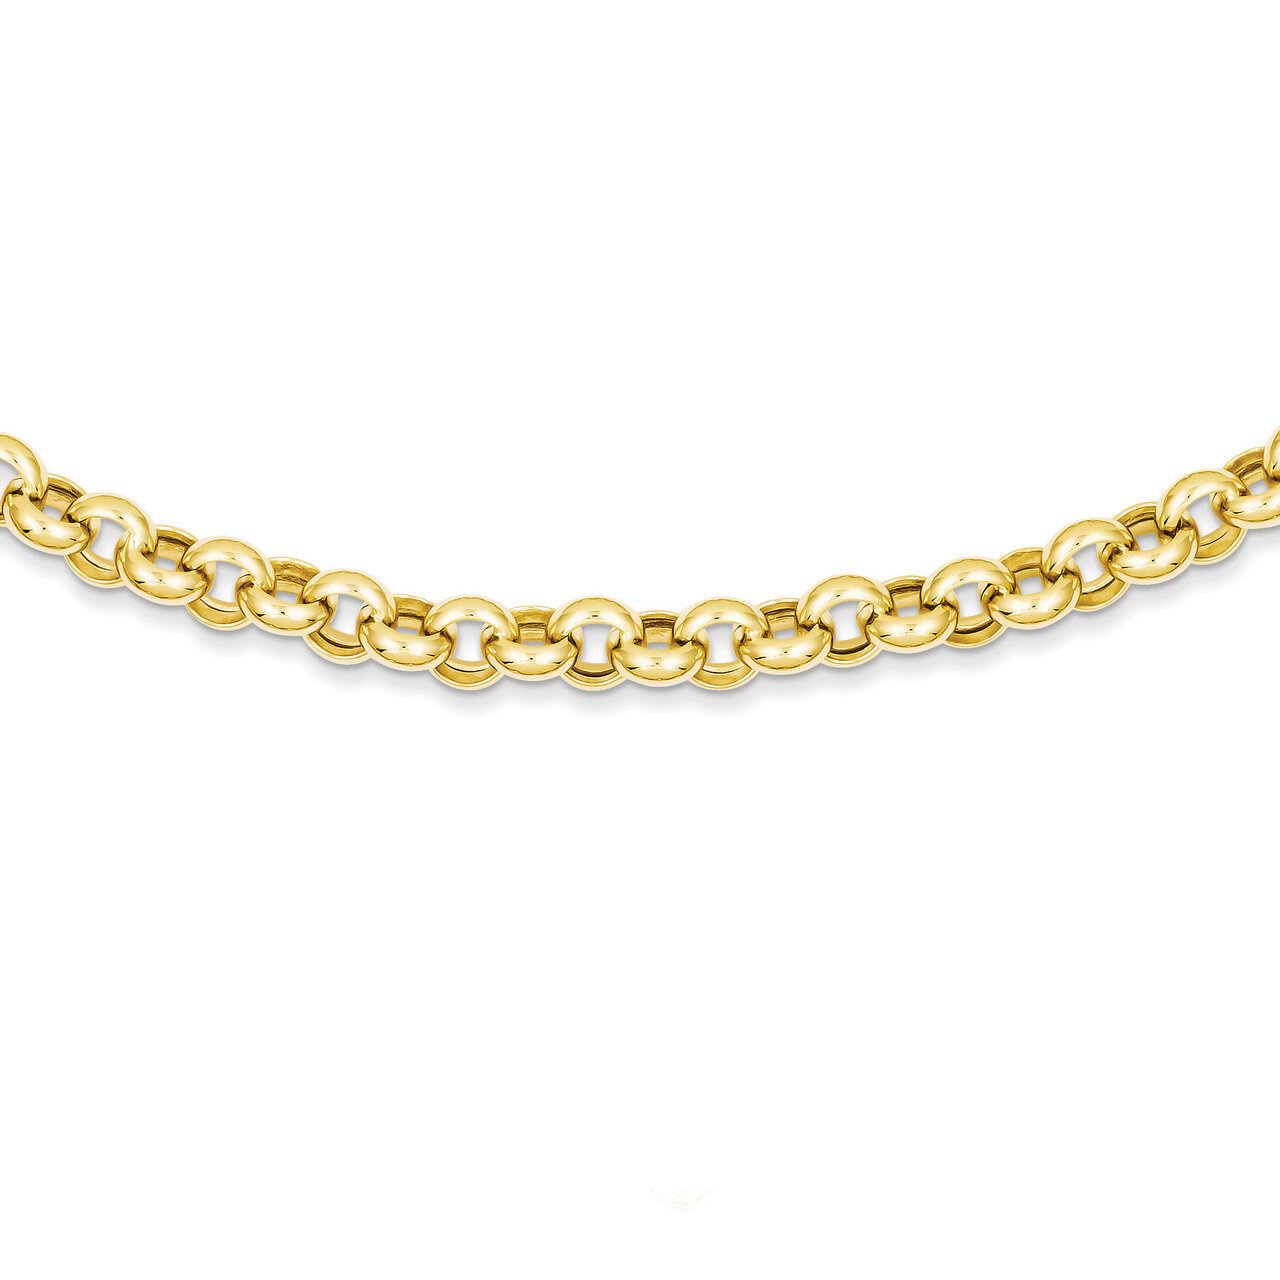 7mm Polished Fancy Rolo Link Necklace 18 Inch 14k Gold SF419-18